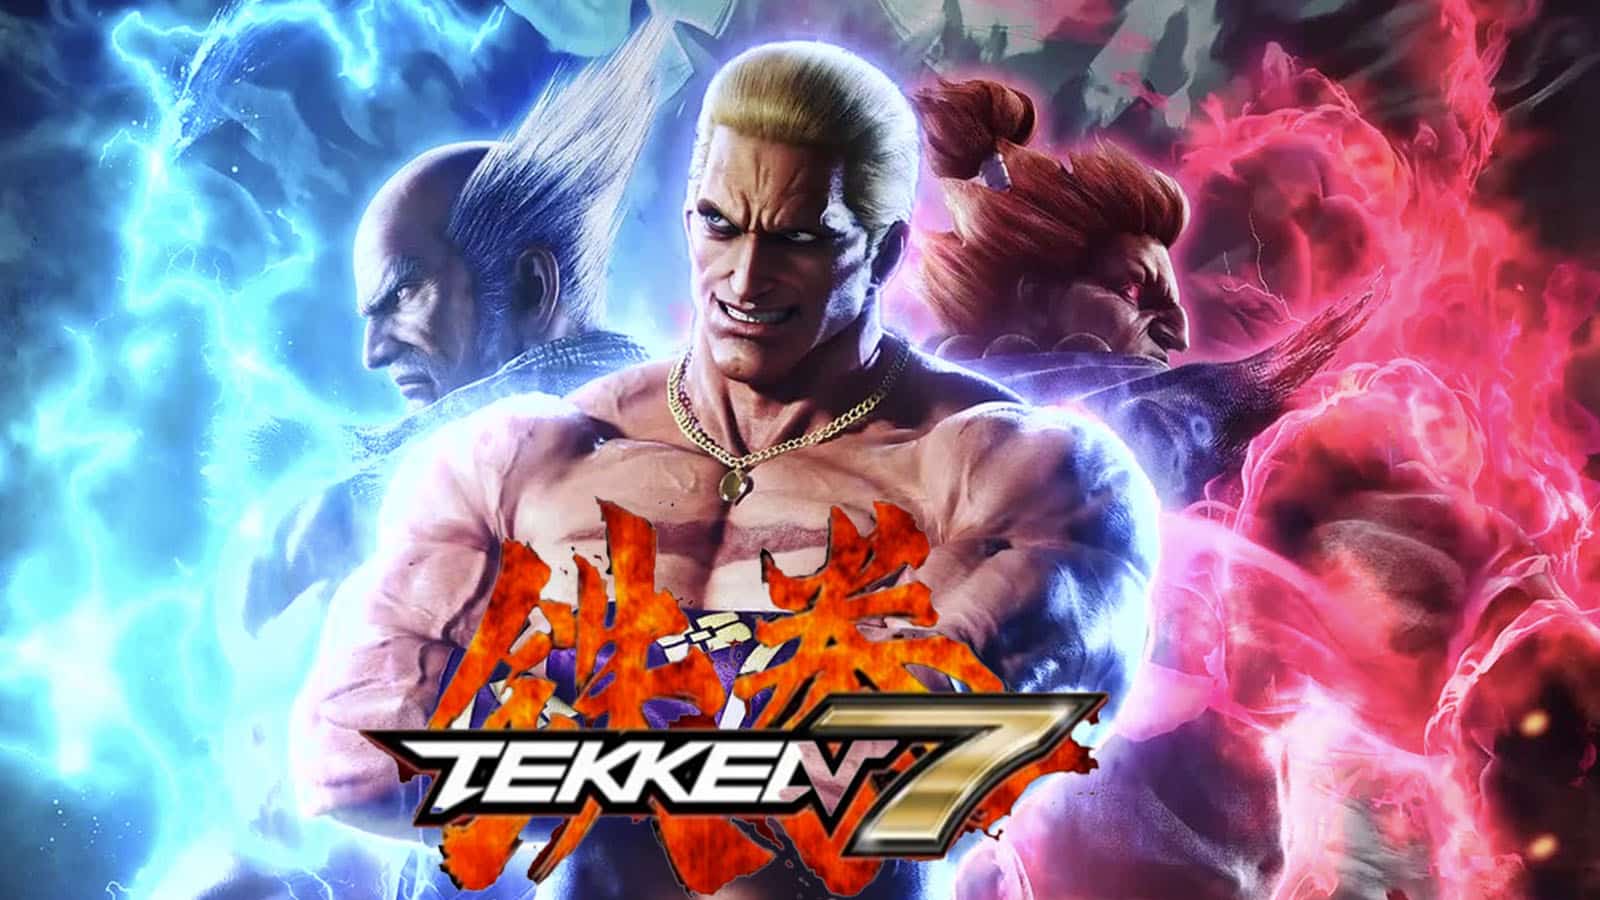 How to unlock Tekken 7 characters: All DLC fighters to complete